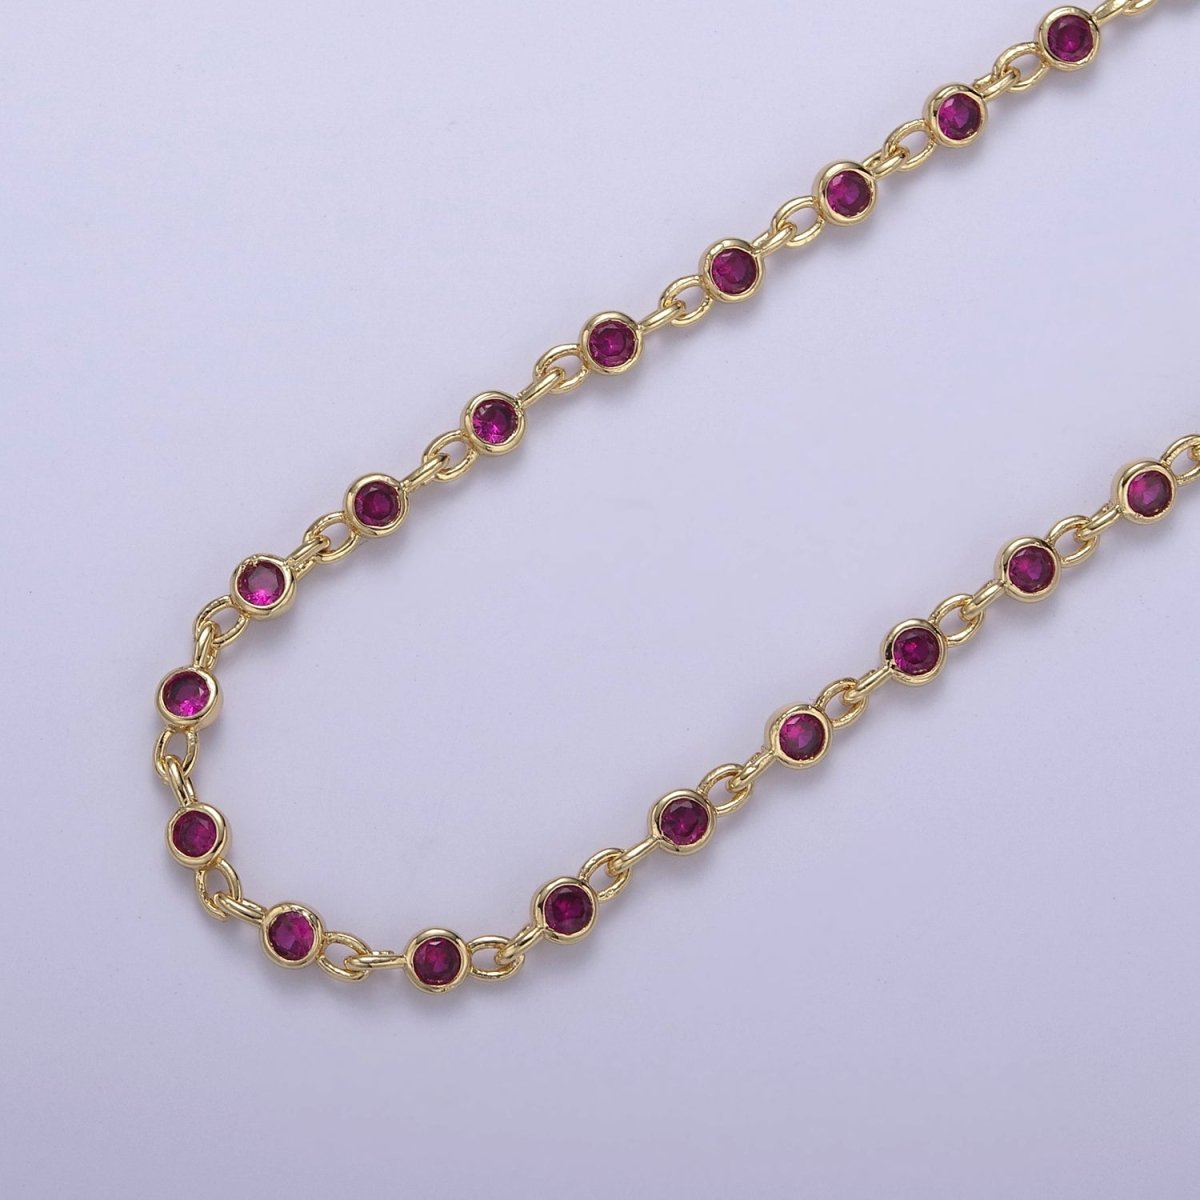 24K Gold Filled 2mm Fuchsia Round Cut Bezel Chain by Yard, Station Necklace CZ Diamond by Foot for Necklace Bracelet Jewelry Making | ROLL-775 Clearance Pricing - DLUXCA